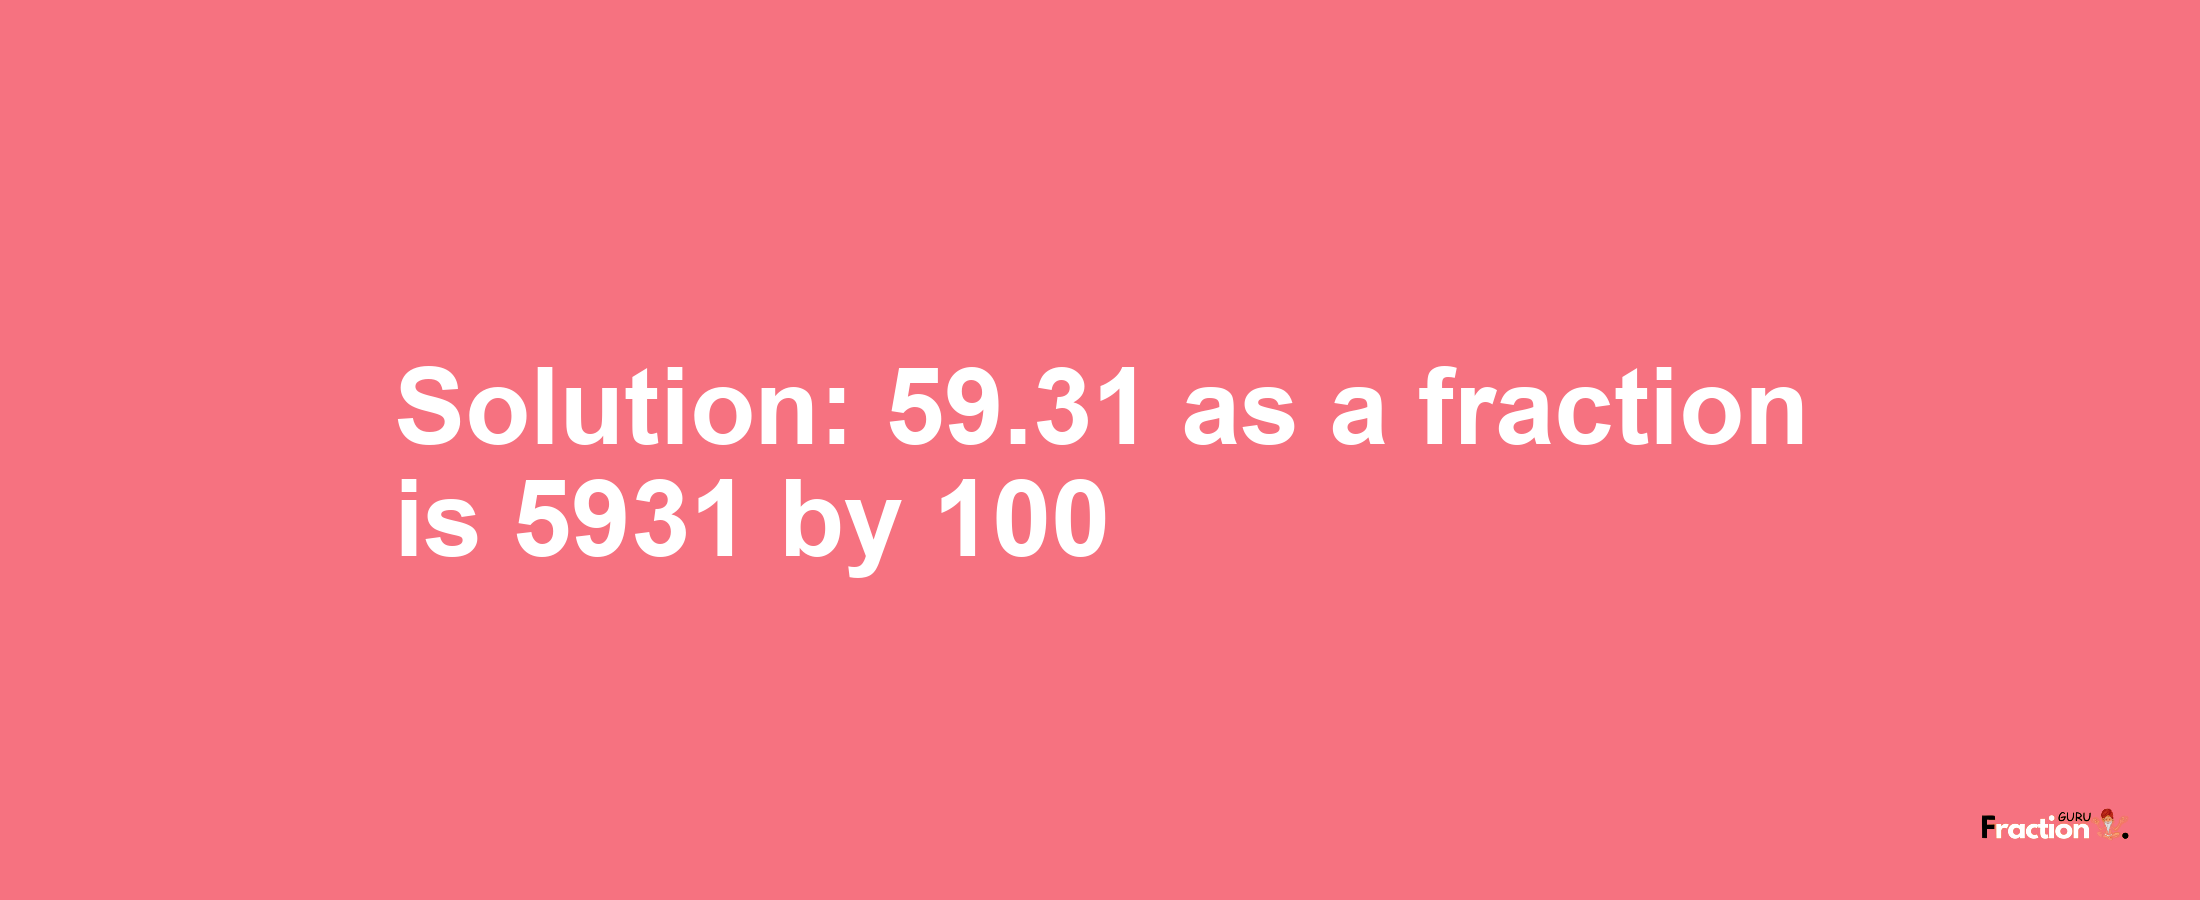 Solution:59.31 as a fraction is 5931/100